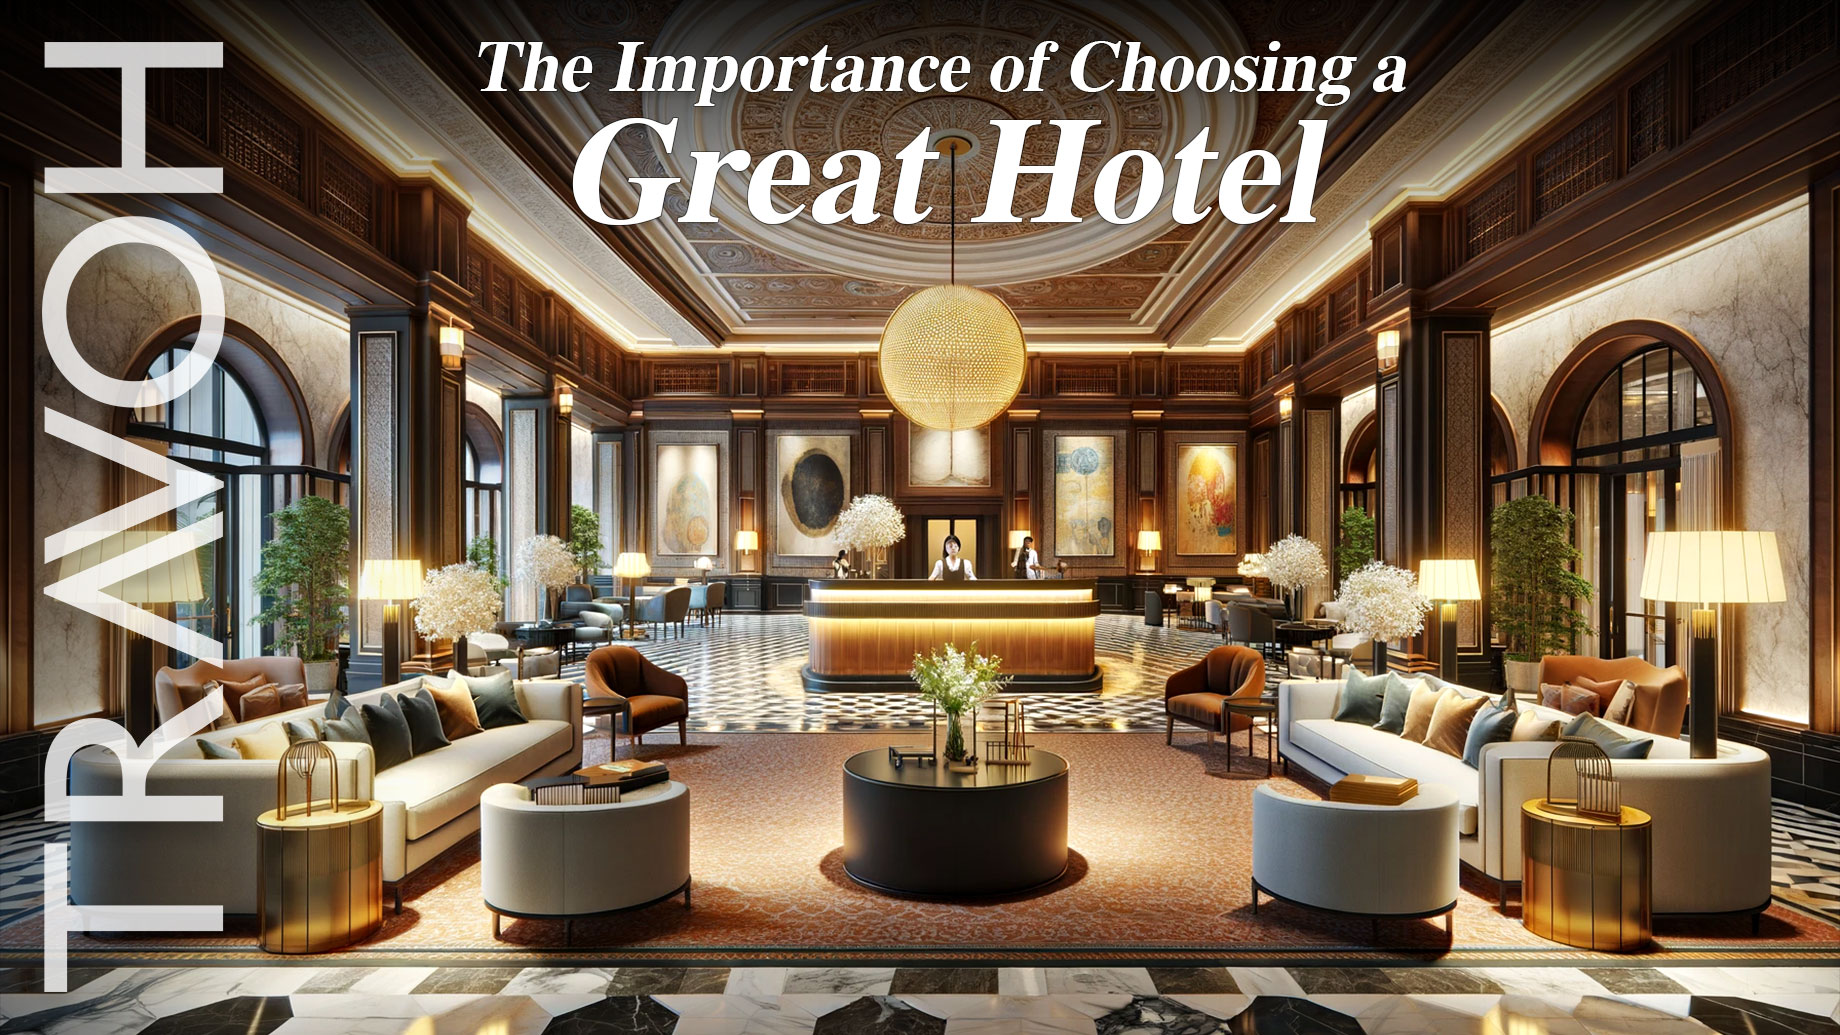 The Importance of Choosing a Great Hotel